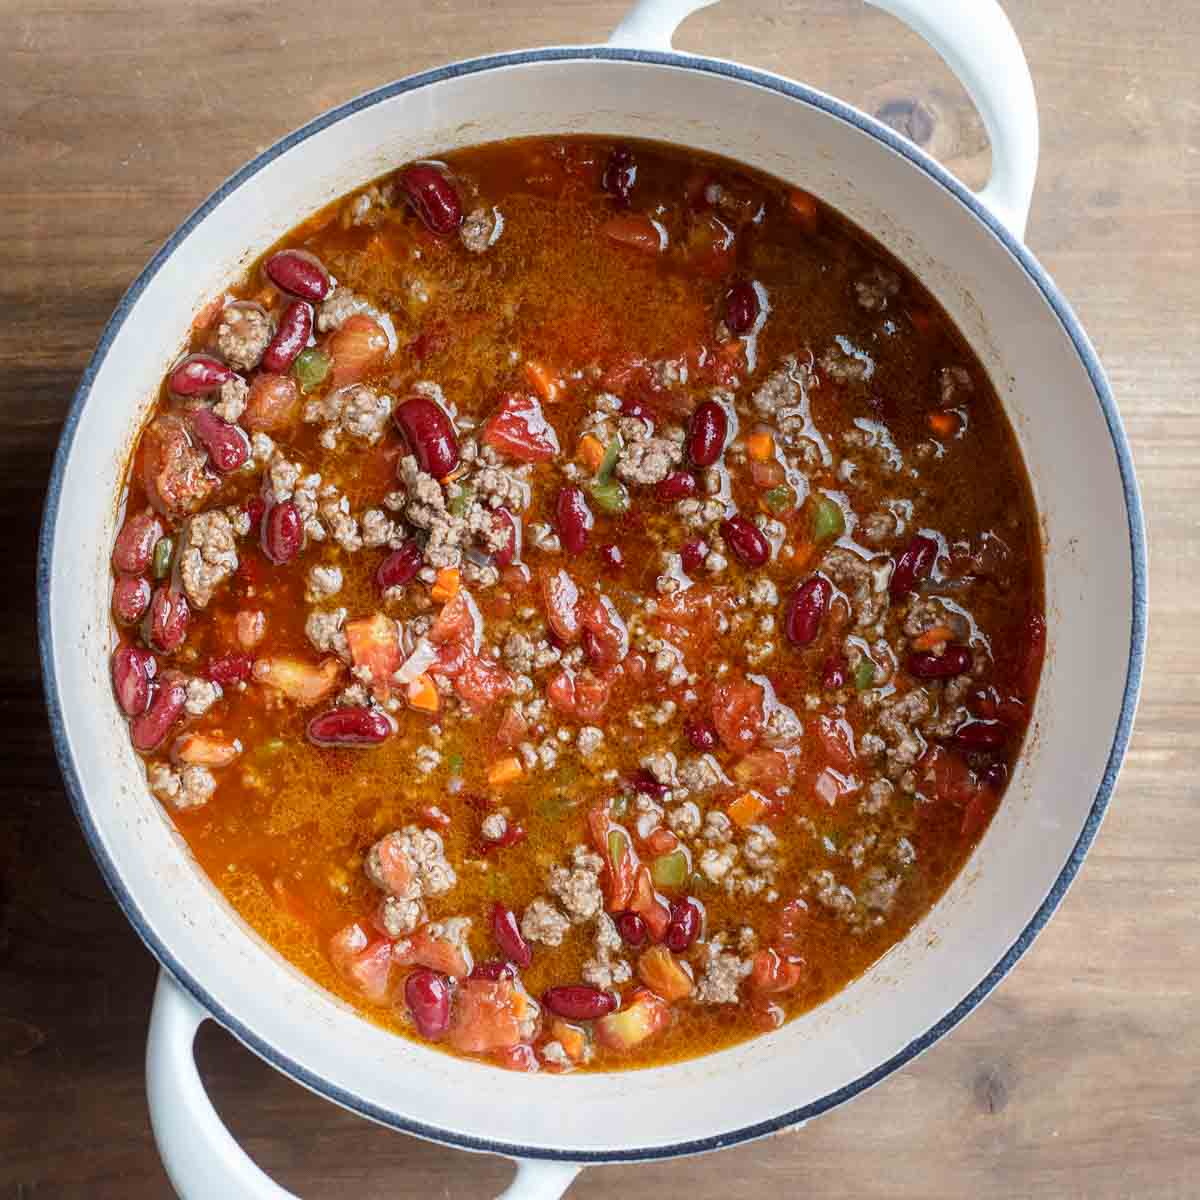 The pot of cooking chili with broth. 